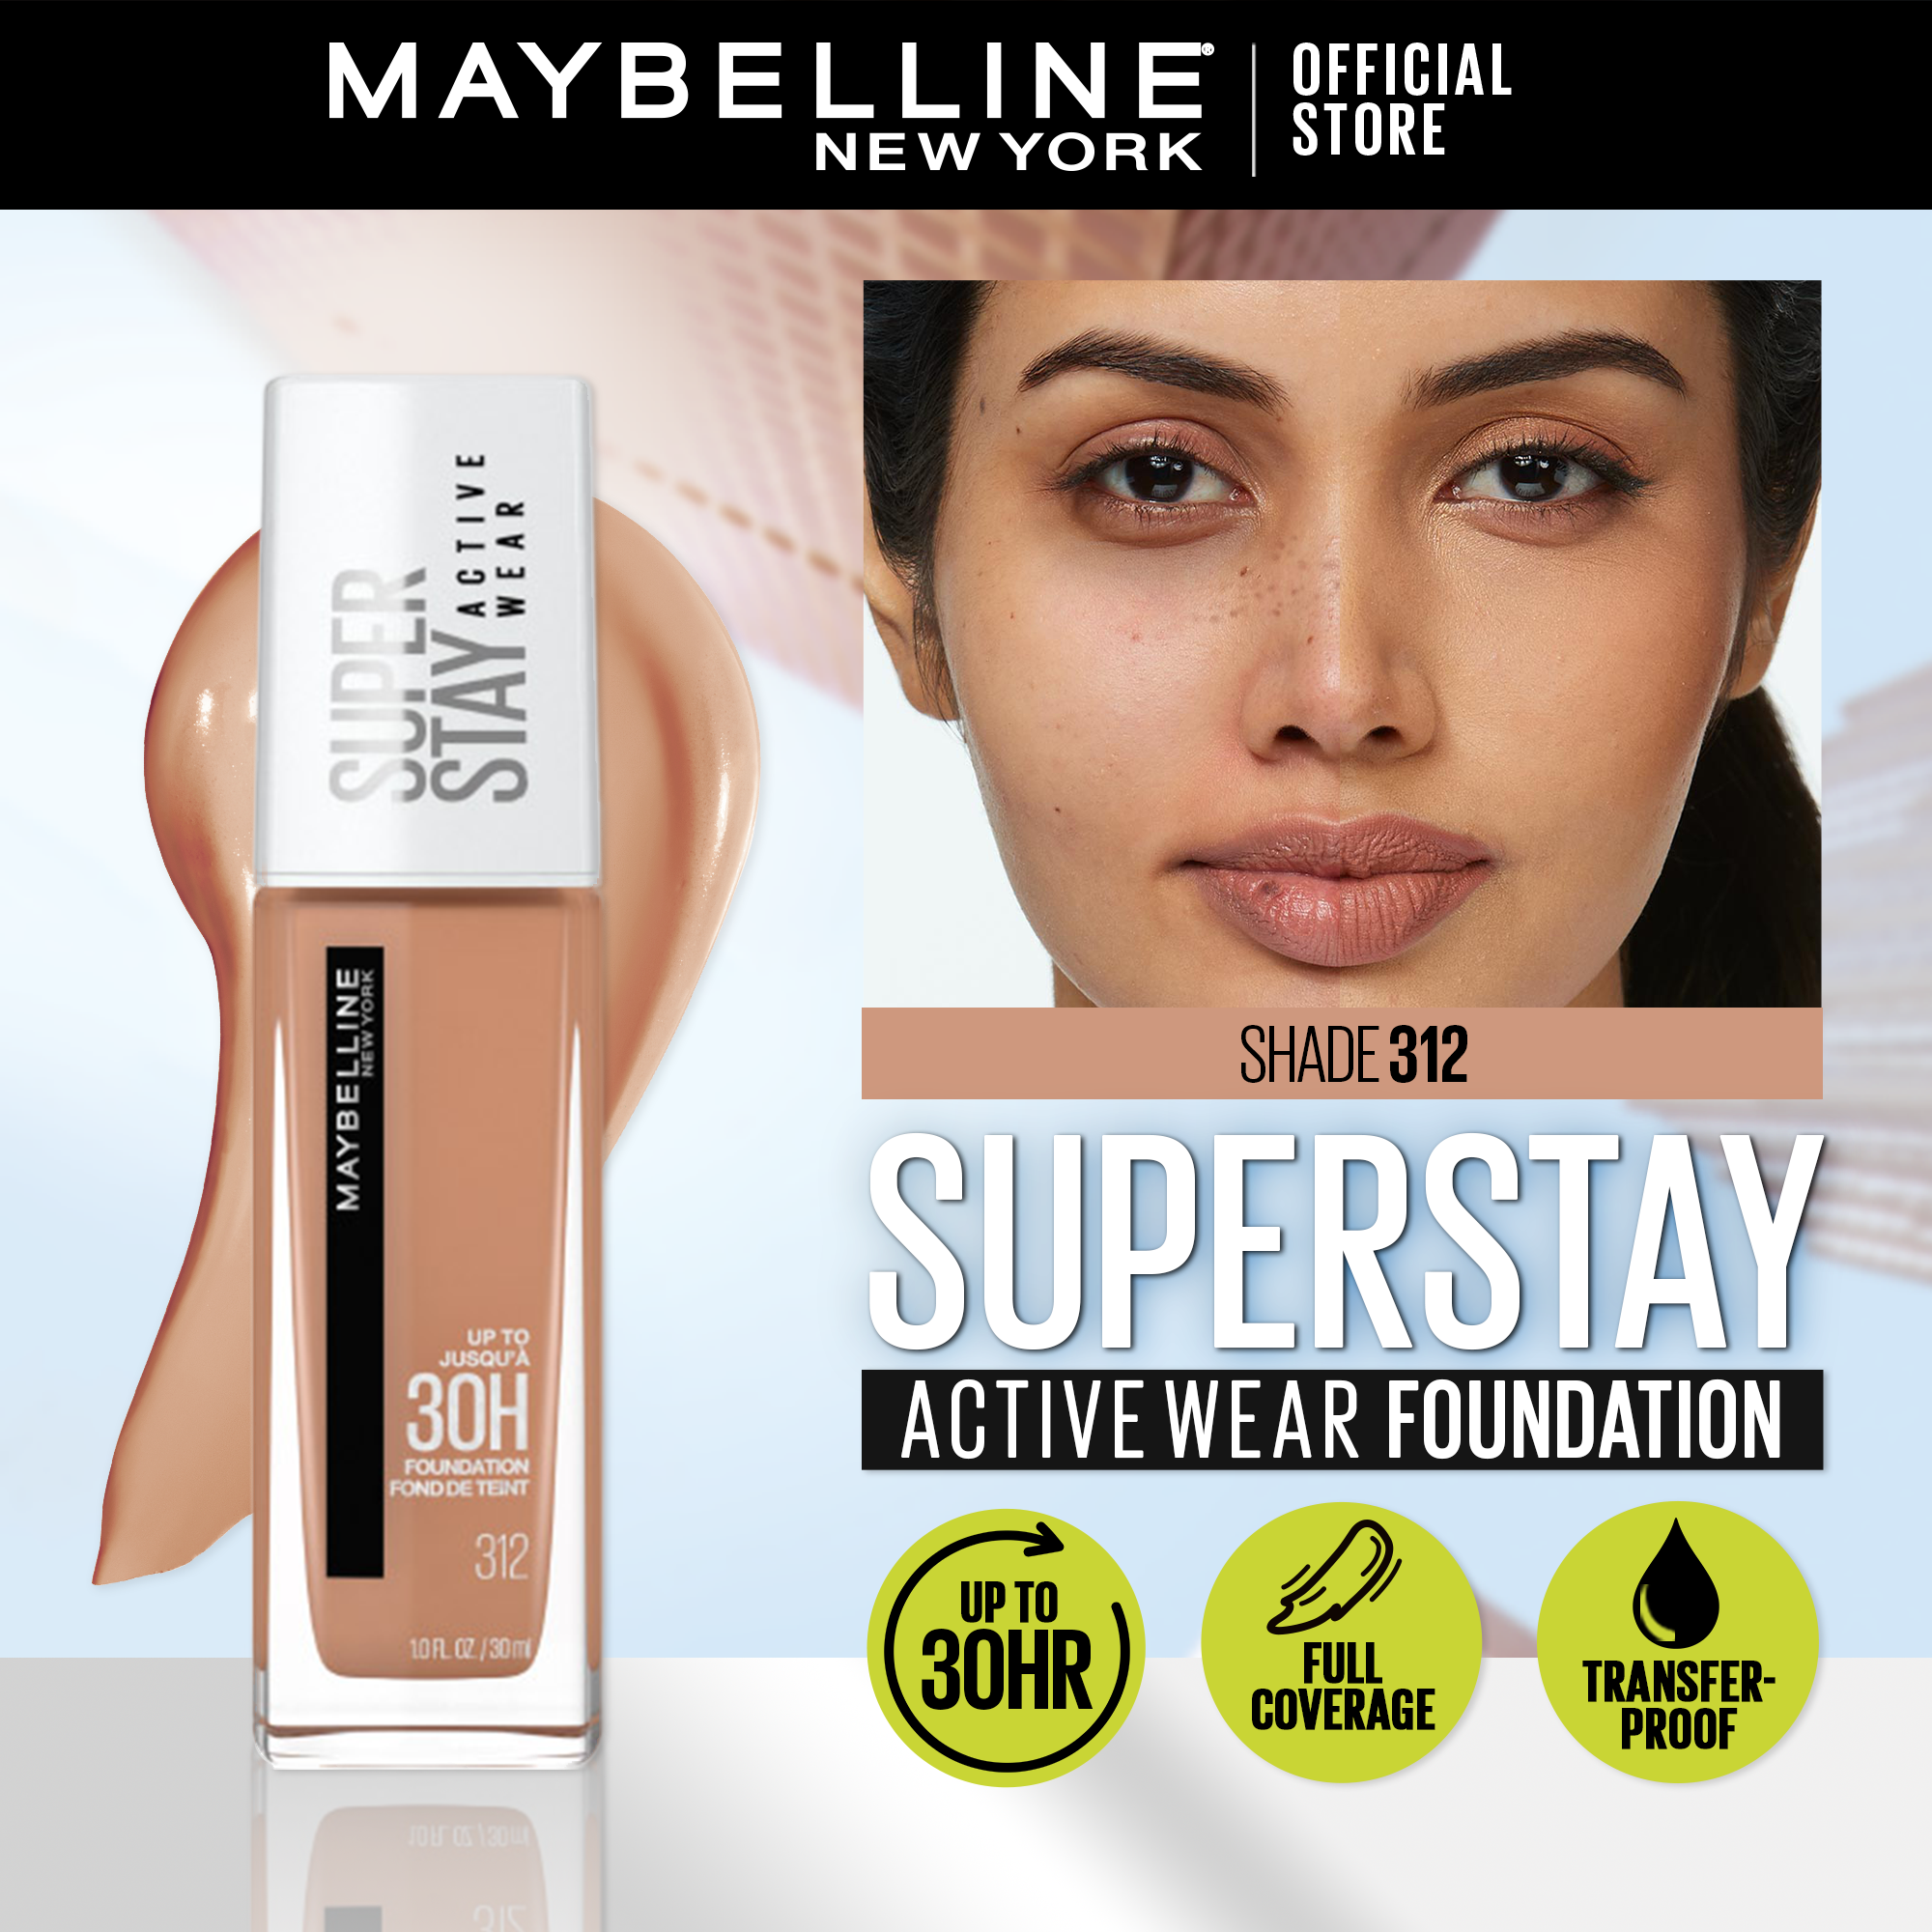 Liquid (30mL) Superstay PH Coverage, Lazada Maybelline lasting, Active Wear - 30HR Long Waterproof | Foundation